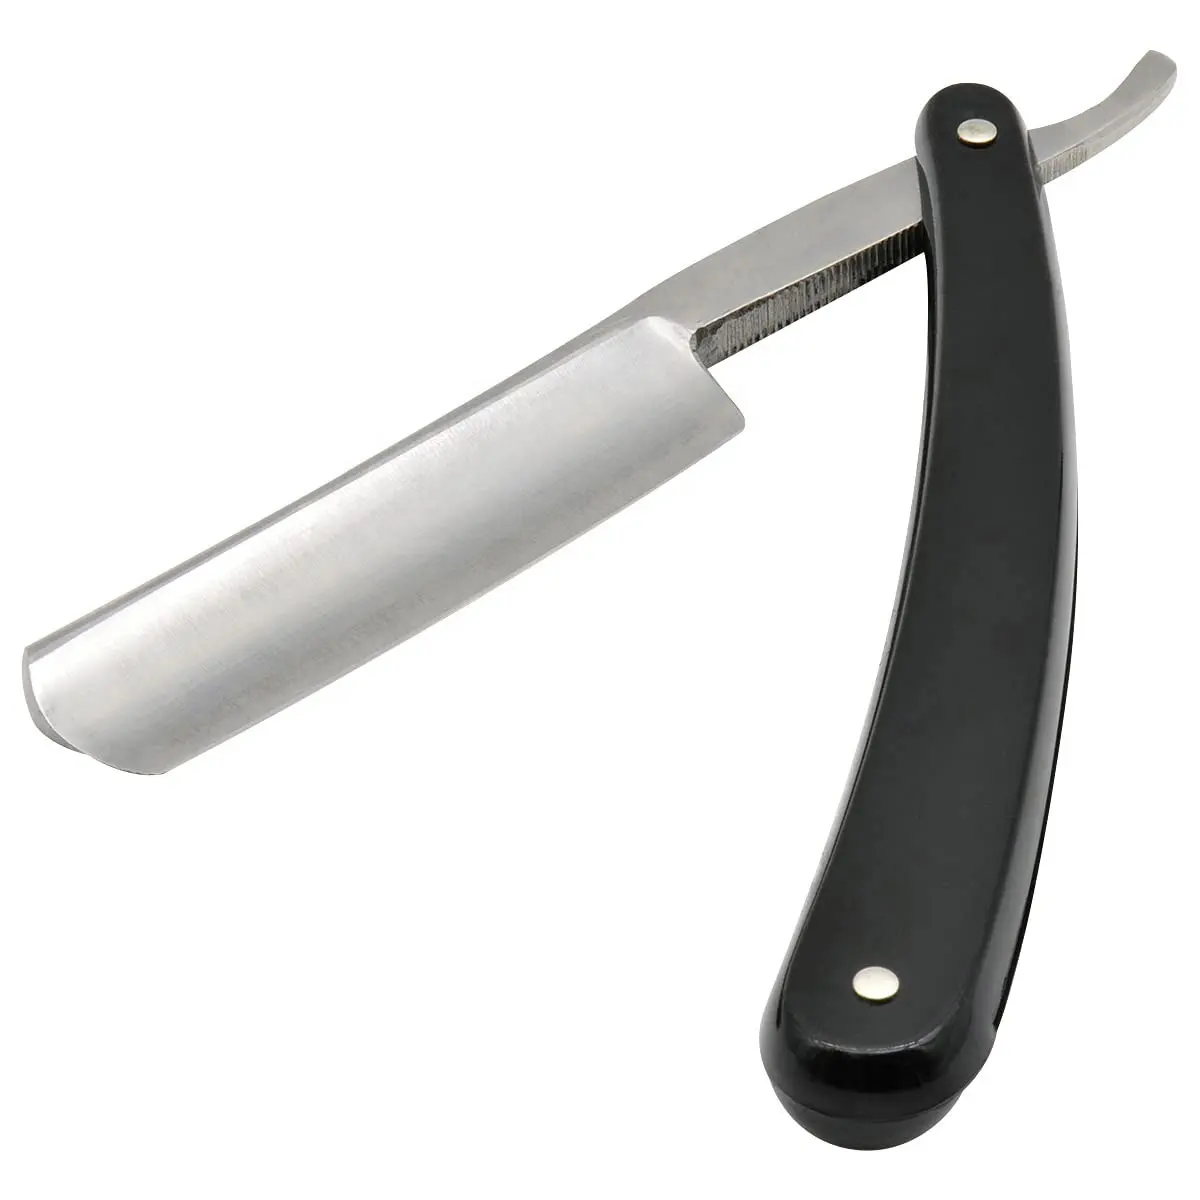 Finest Quality Stainless Steel Straight Edge Razor with Smooth Black Handle Barber Cut Throat Razor Blades